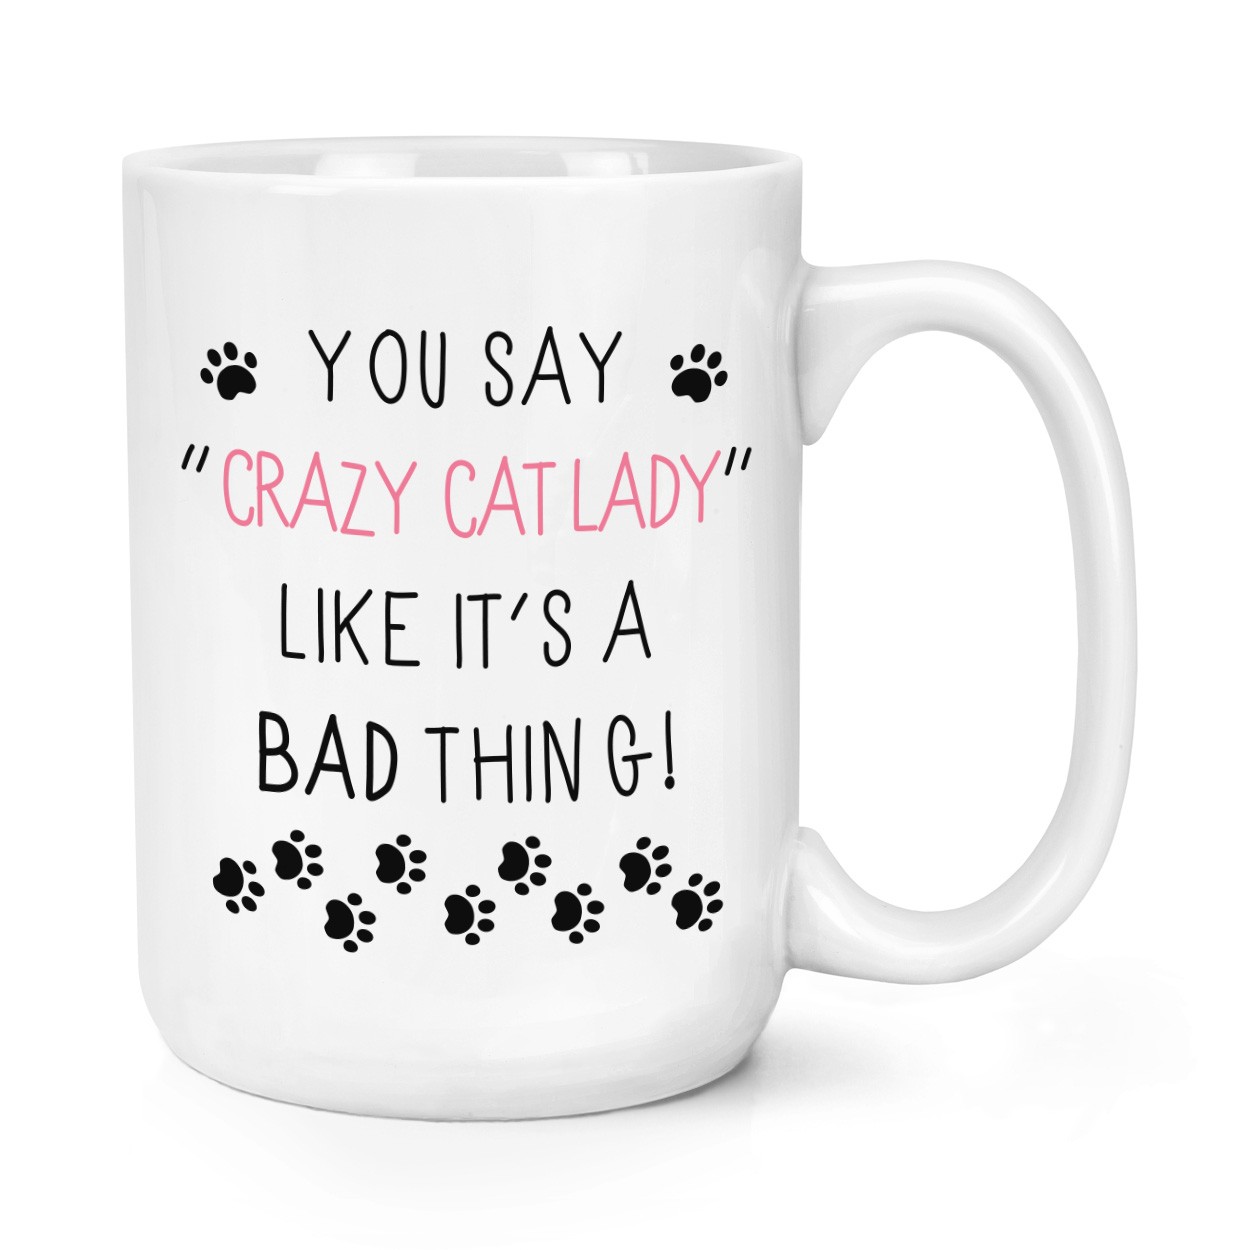 You Say Crazy Cat Lady Like It's A Bad Thing 15oz Large Mug Cup